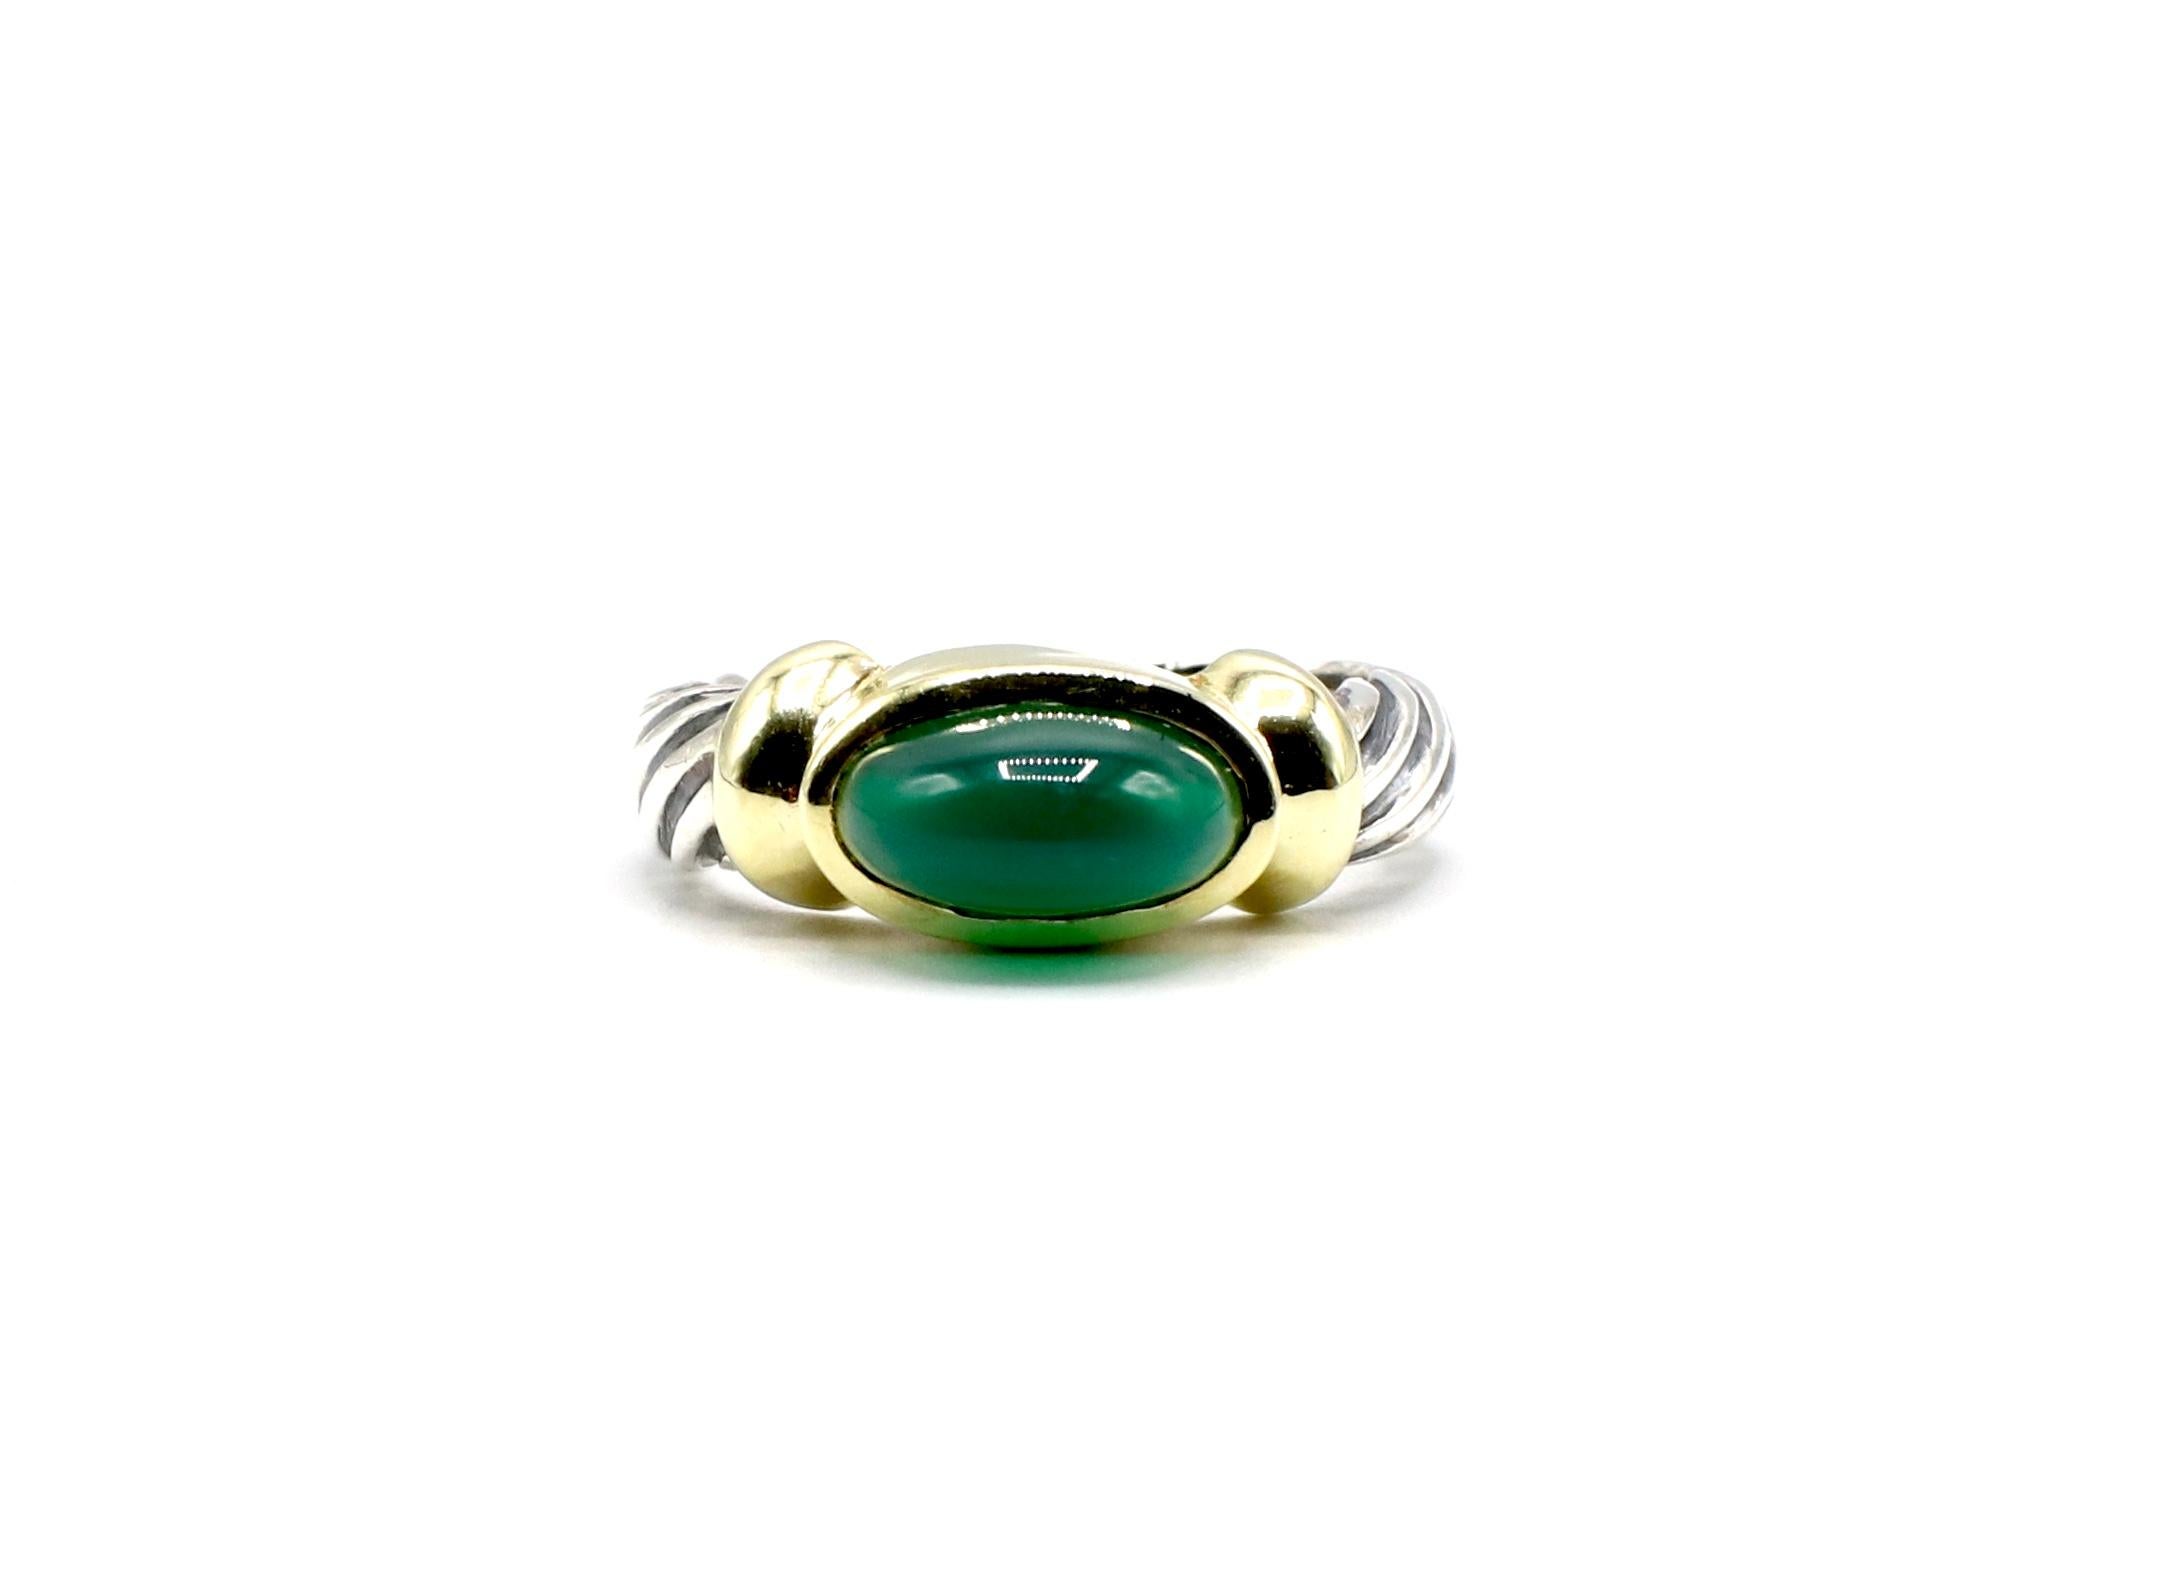 Vintage David Yurman Green Chalcedony Domed Cabochon Sterling Silver / 14K Gold Cable Ring Size 4.5

Metal: Sterling silver / 14k yellow gold
Weight: 4.49 grams
Stone: Green chalcedony, domed cabochon shape, 9.5mm x 5mm 
Size: 4.5 (US) 
Signed: D.